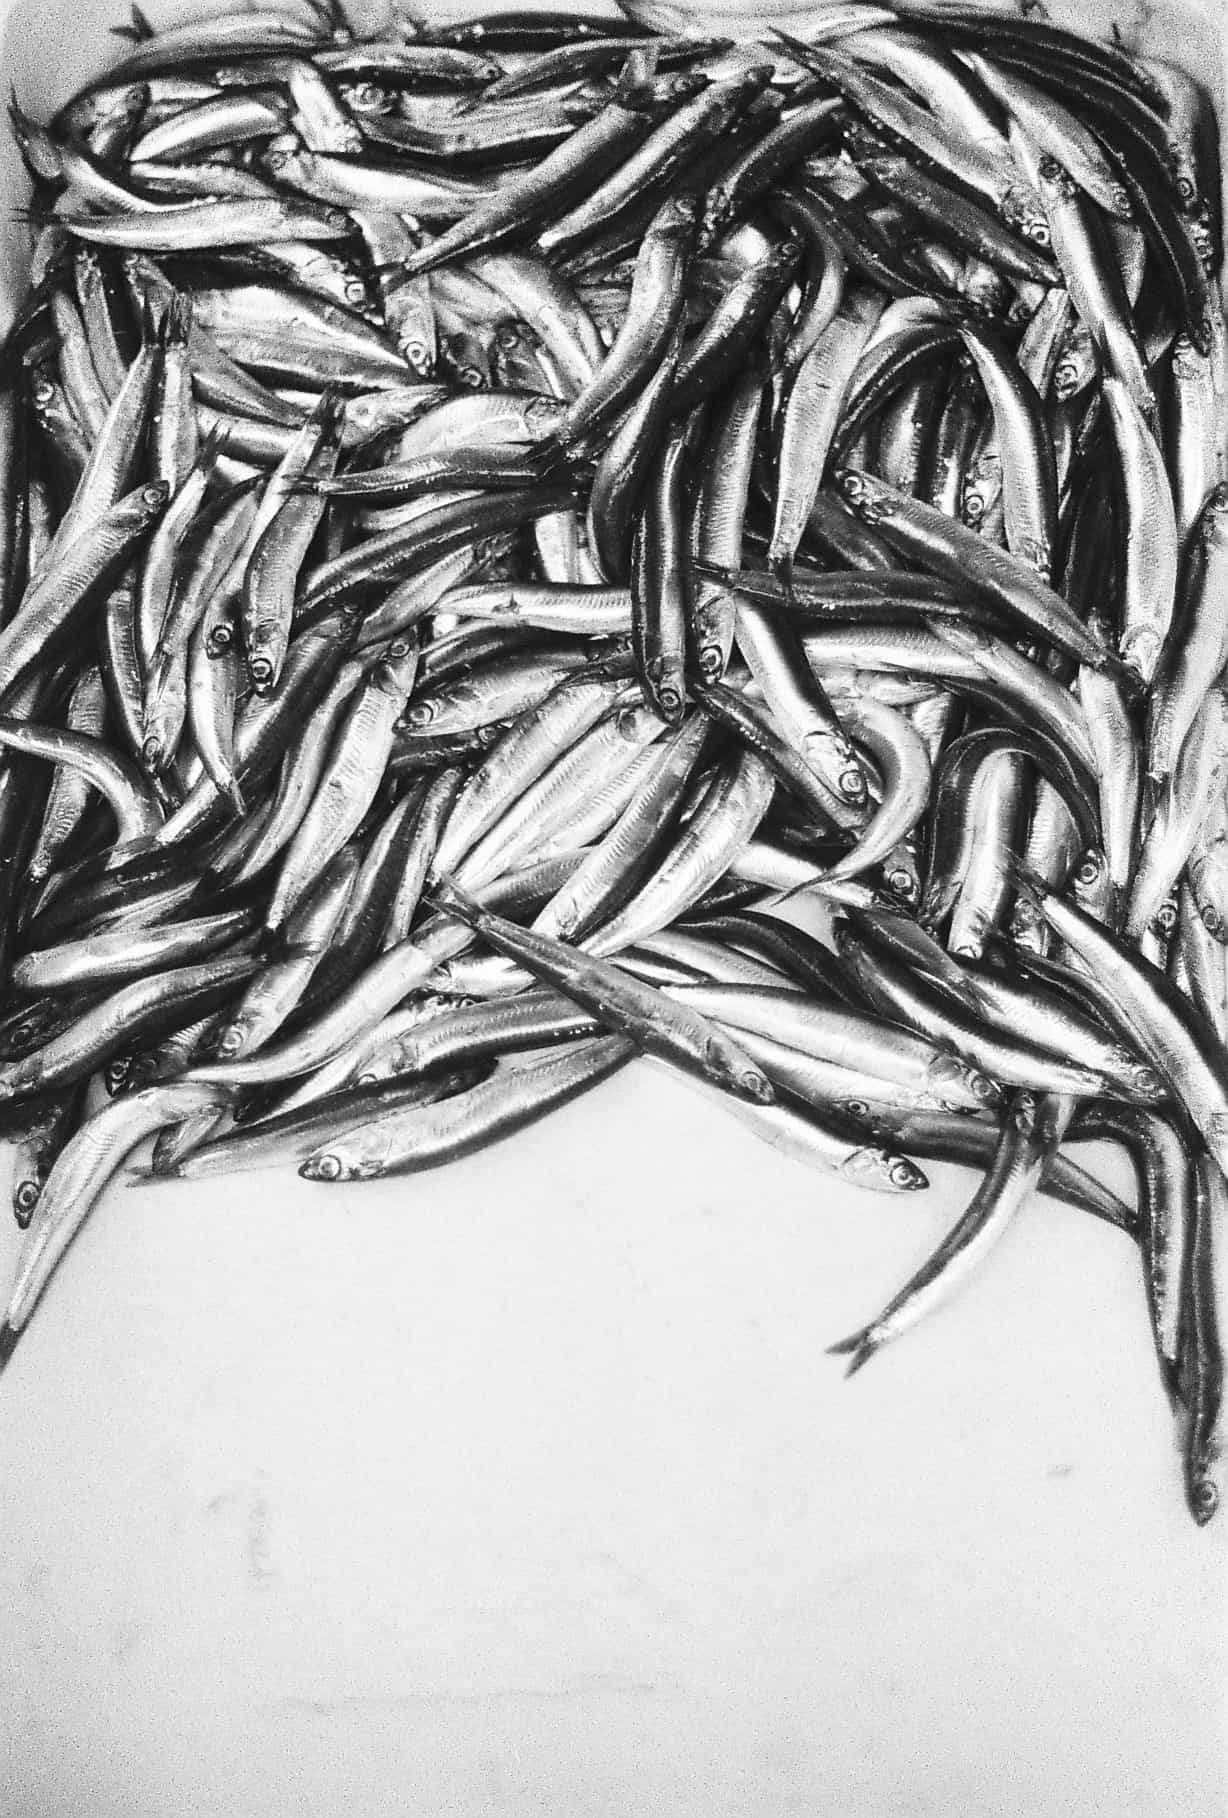 Fish at the Market (Istanbul in Black-and-White)